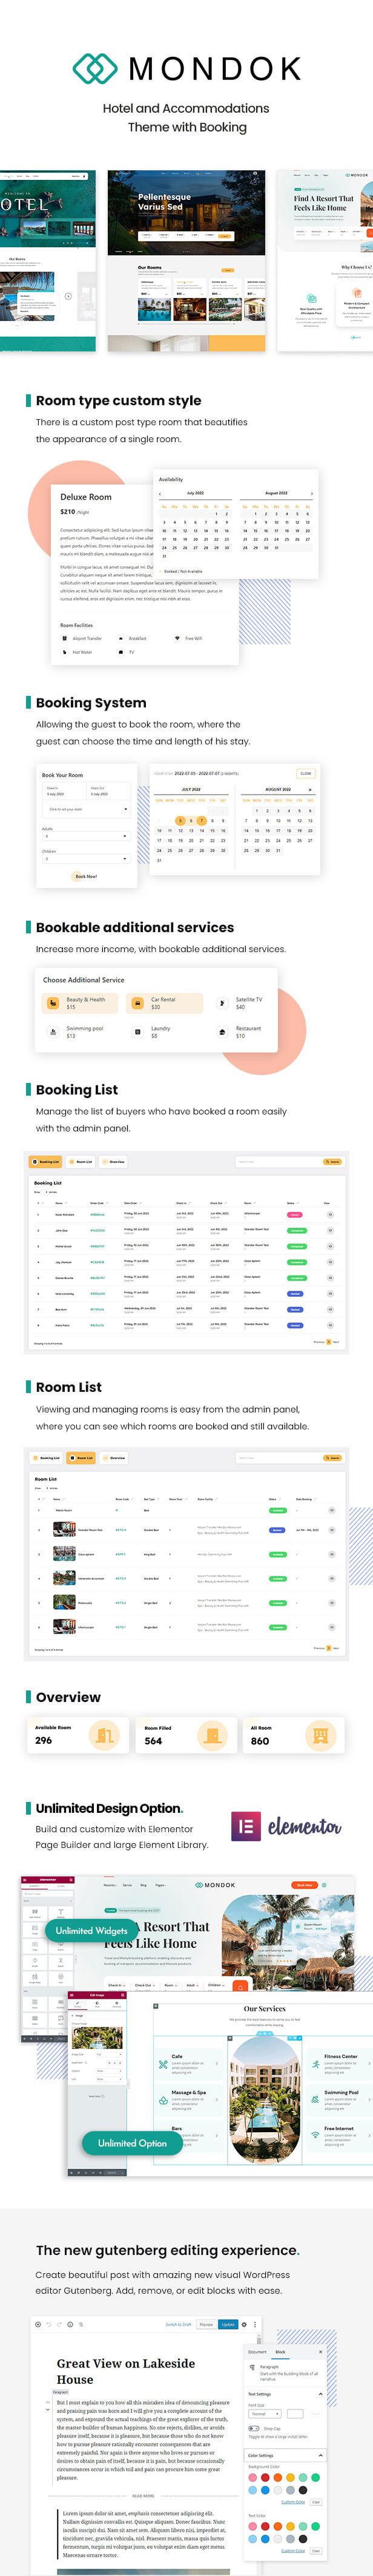 Mondok | Hotel and Accommodations Theme with Booking - 4